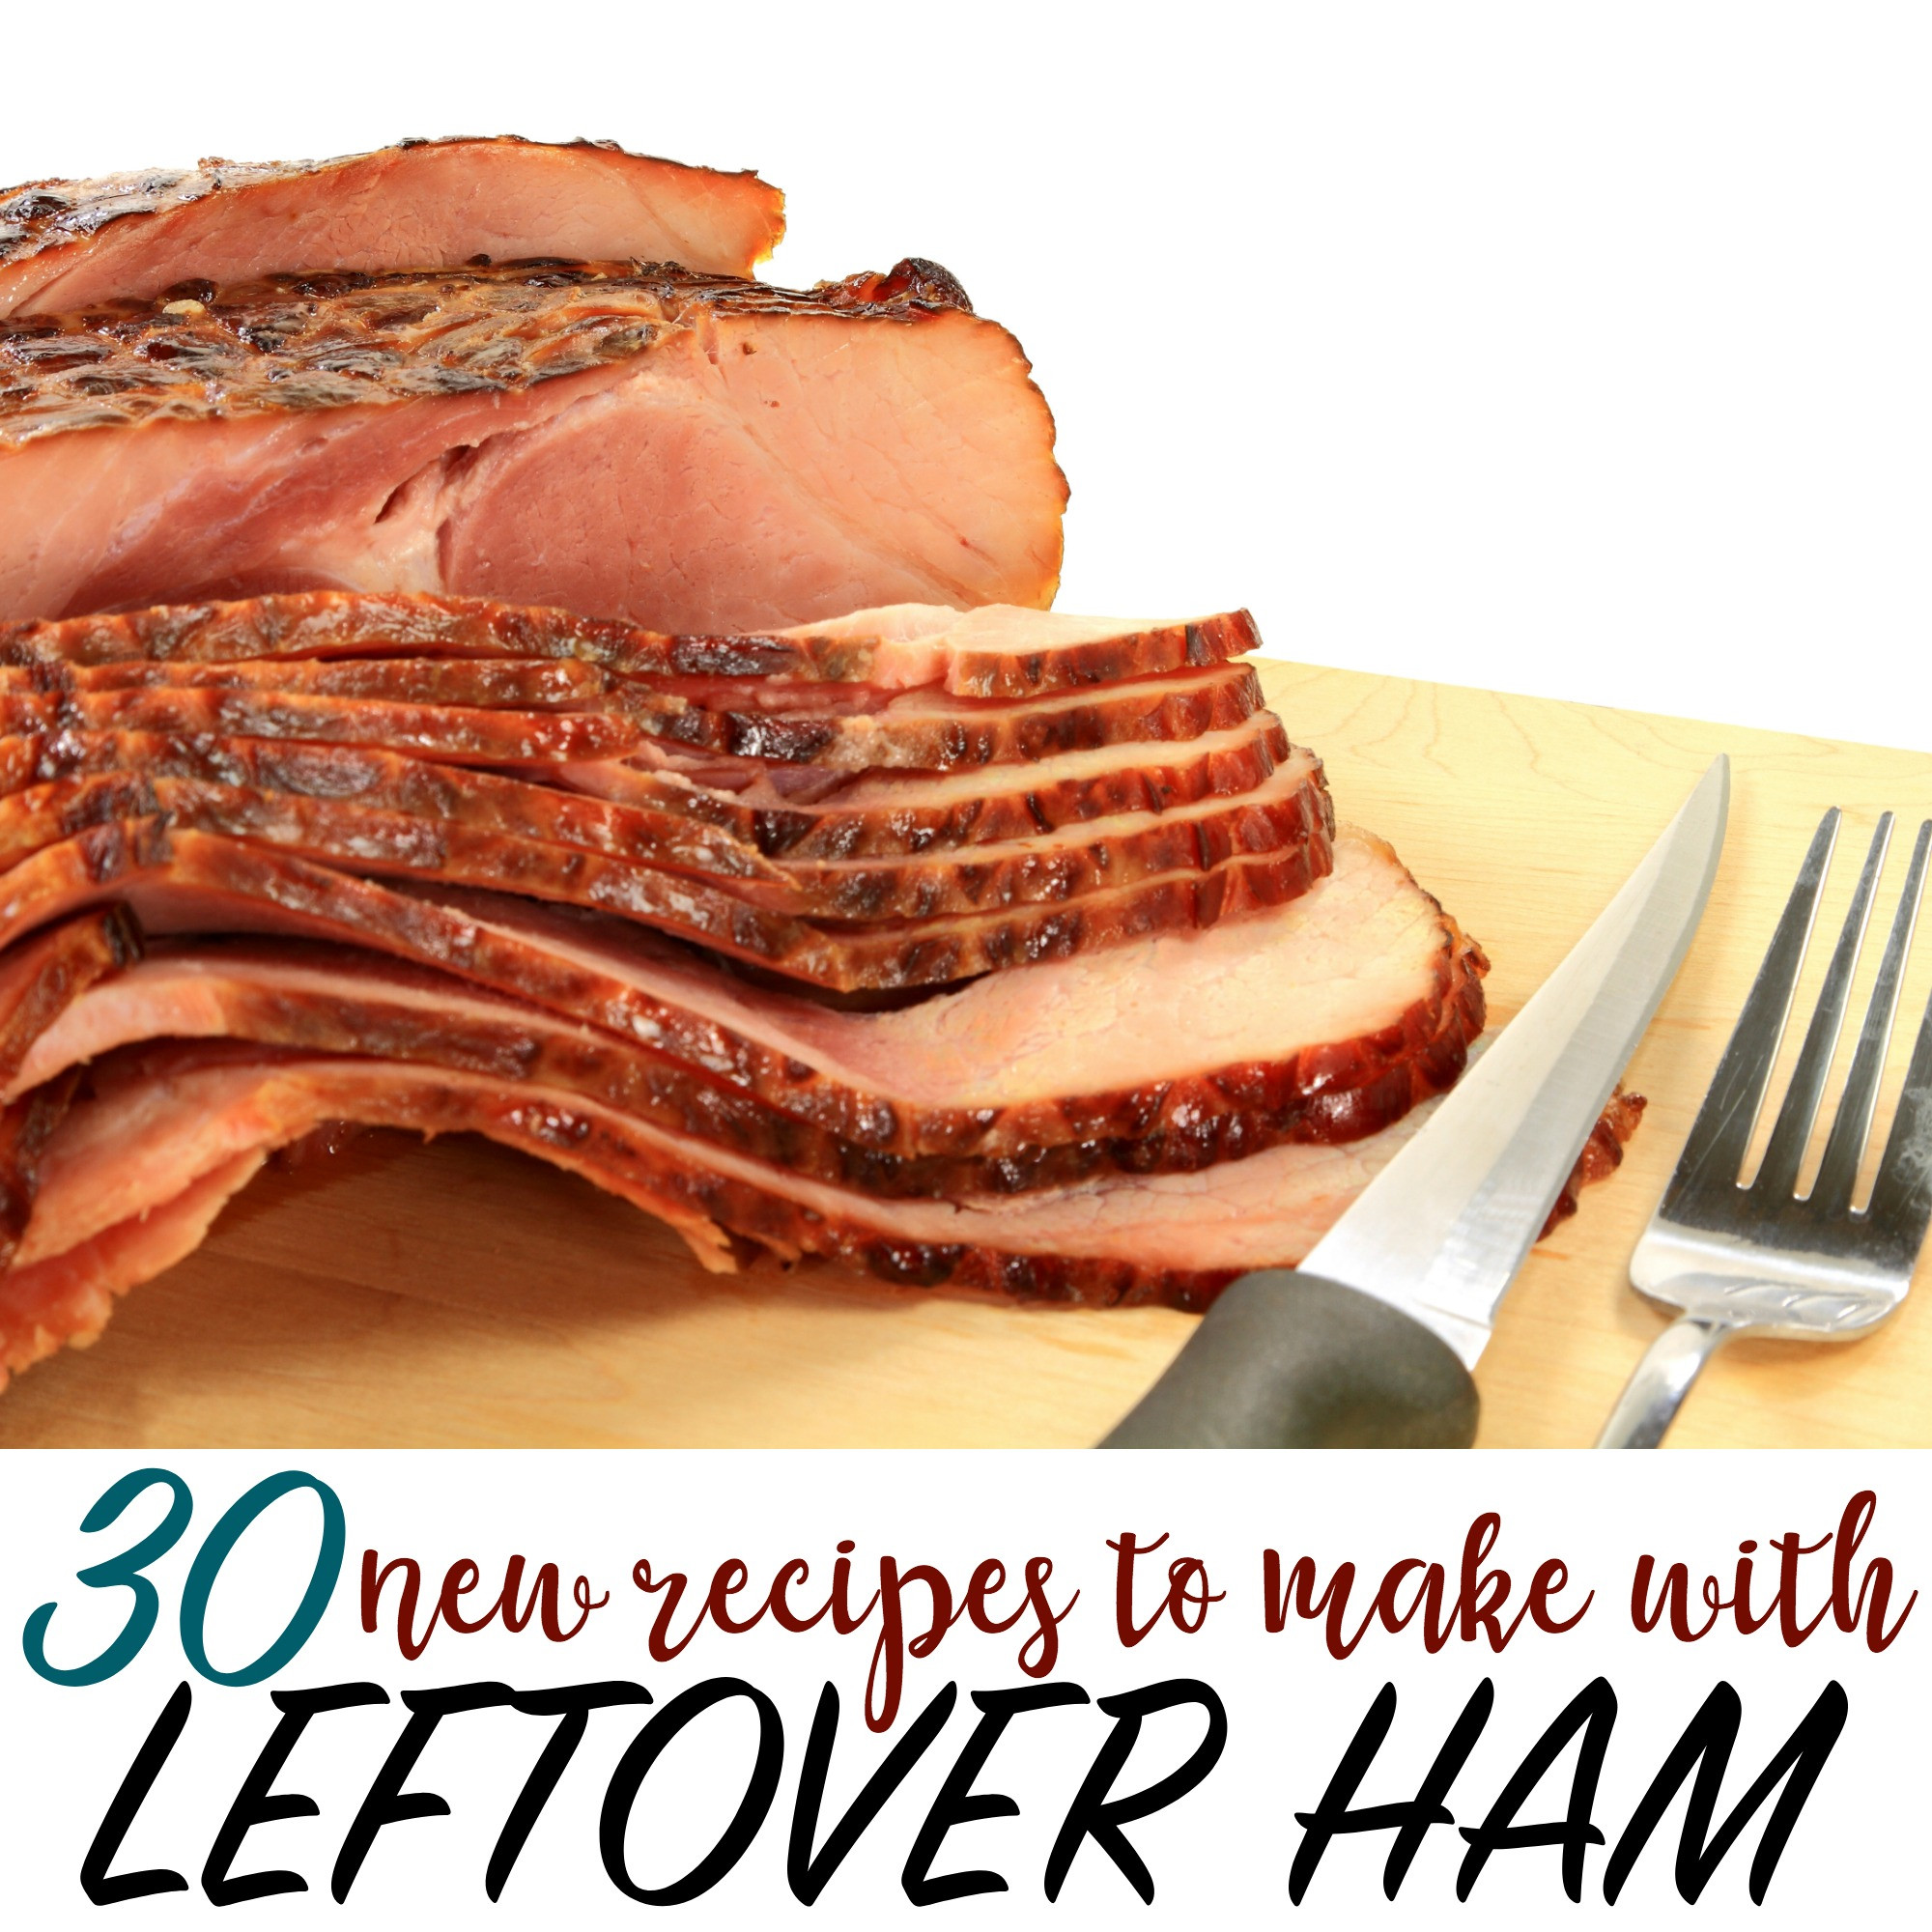 Leftover Easter Ham Recipes
 30 NEW Recipes to Make with Leftover Ham